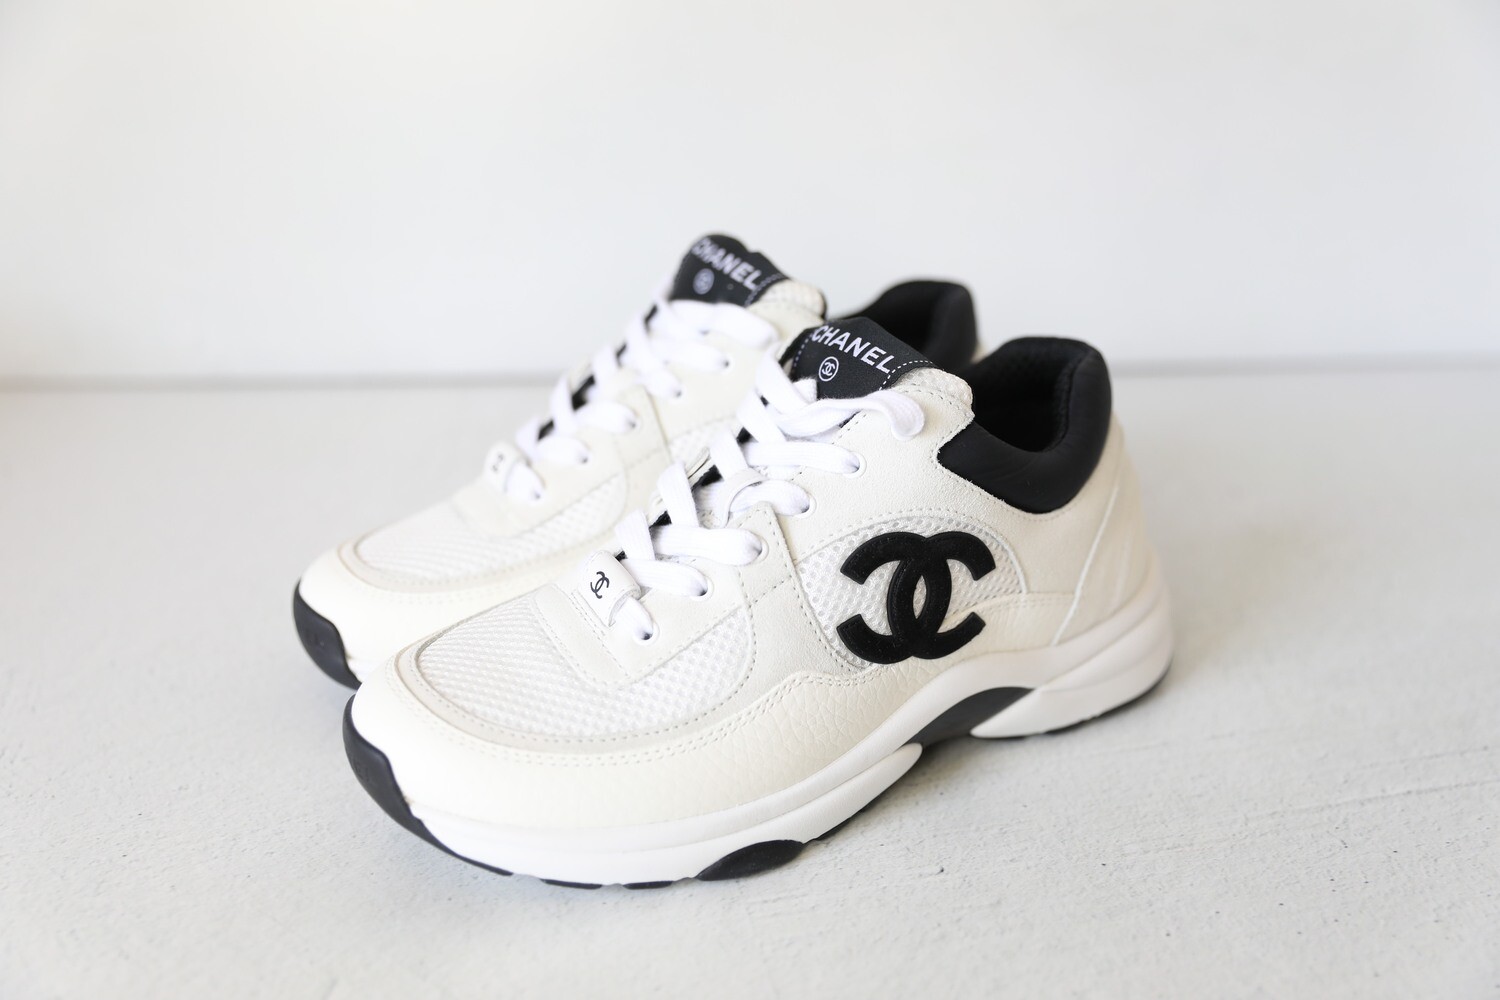 Chanel Shoes Sneakers, Black and White, Size 38, New in Box WA001 - Julia  Rose Boston